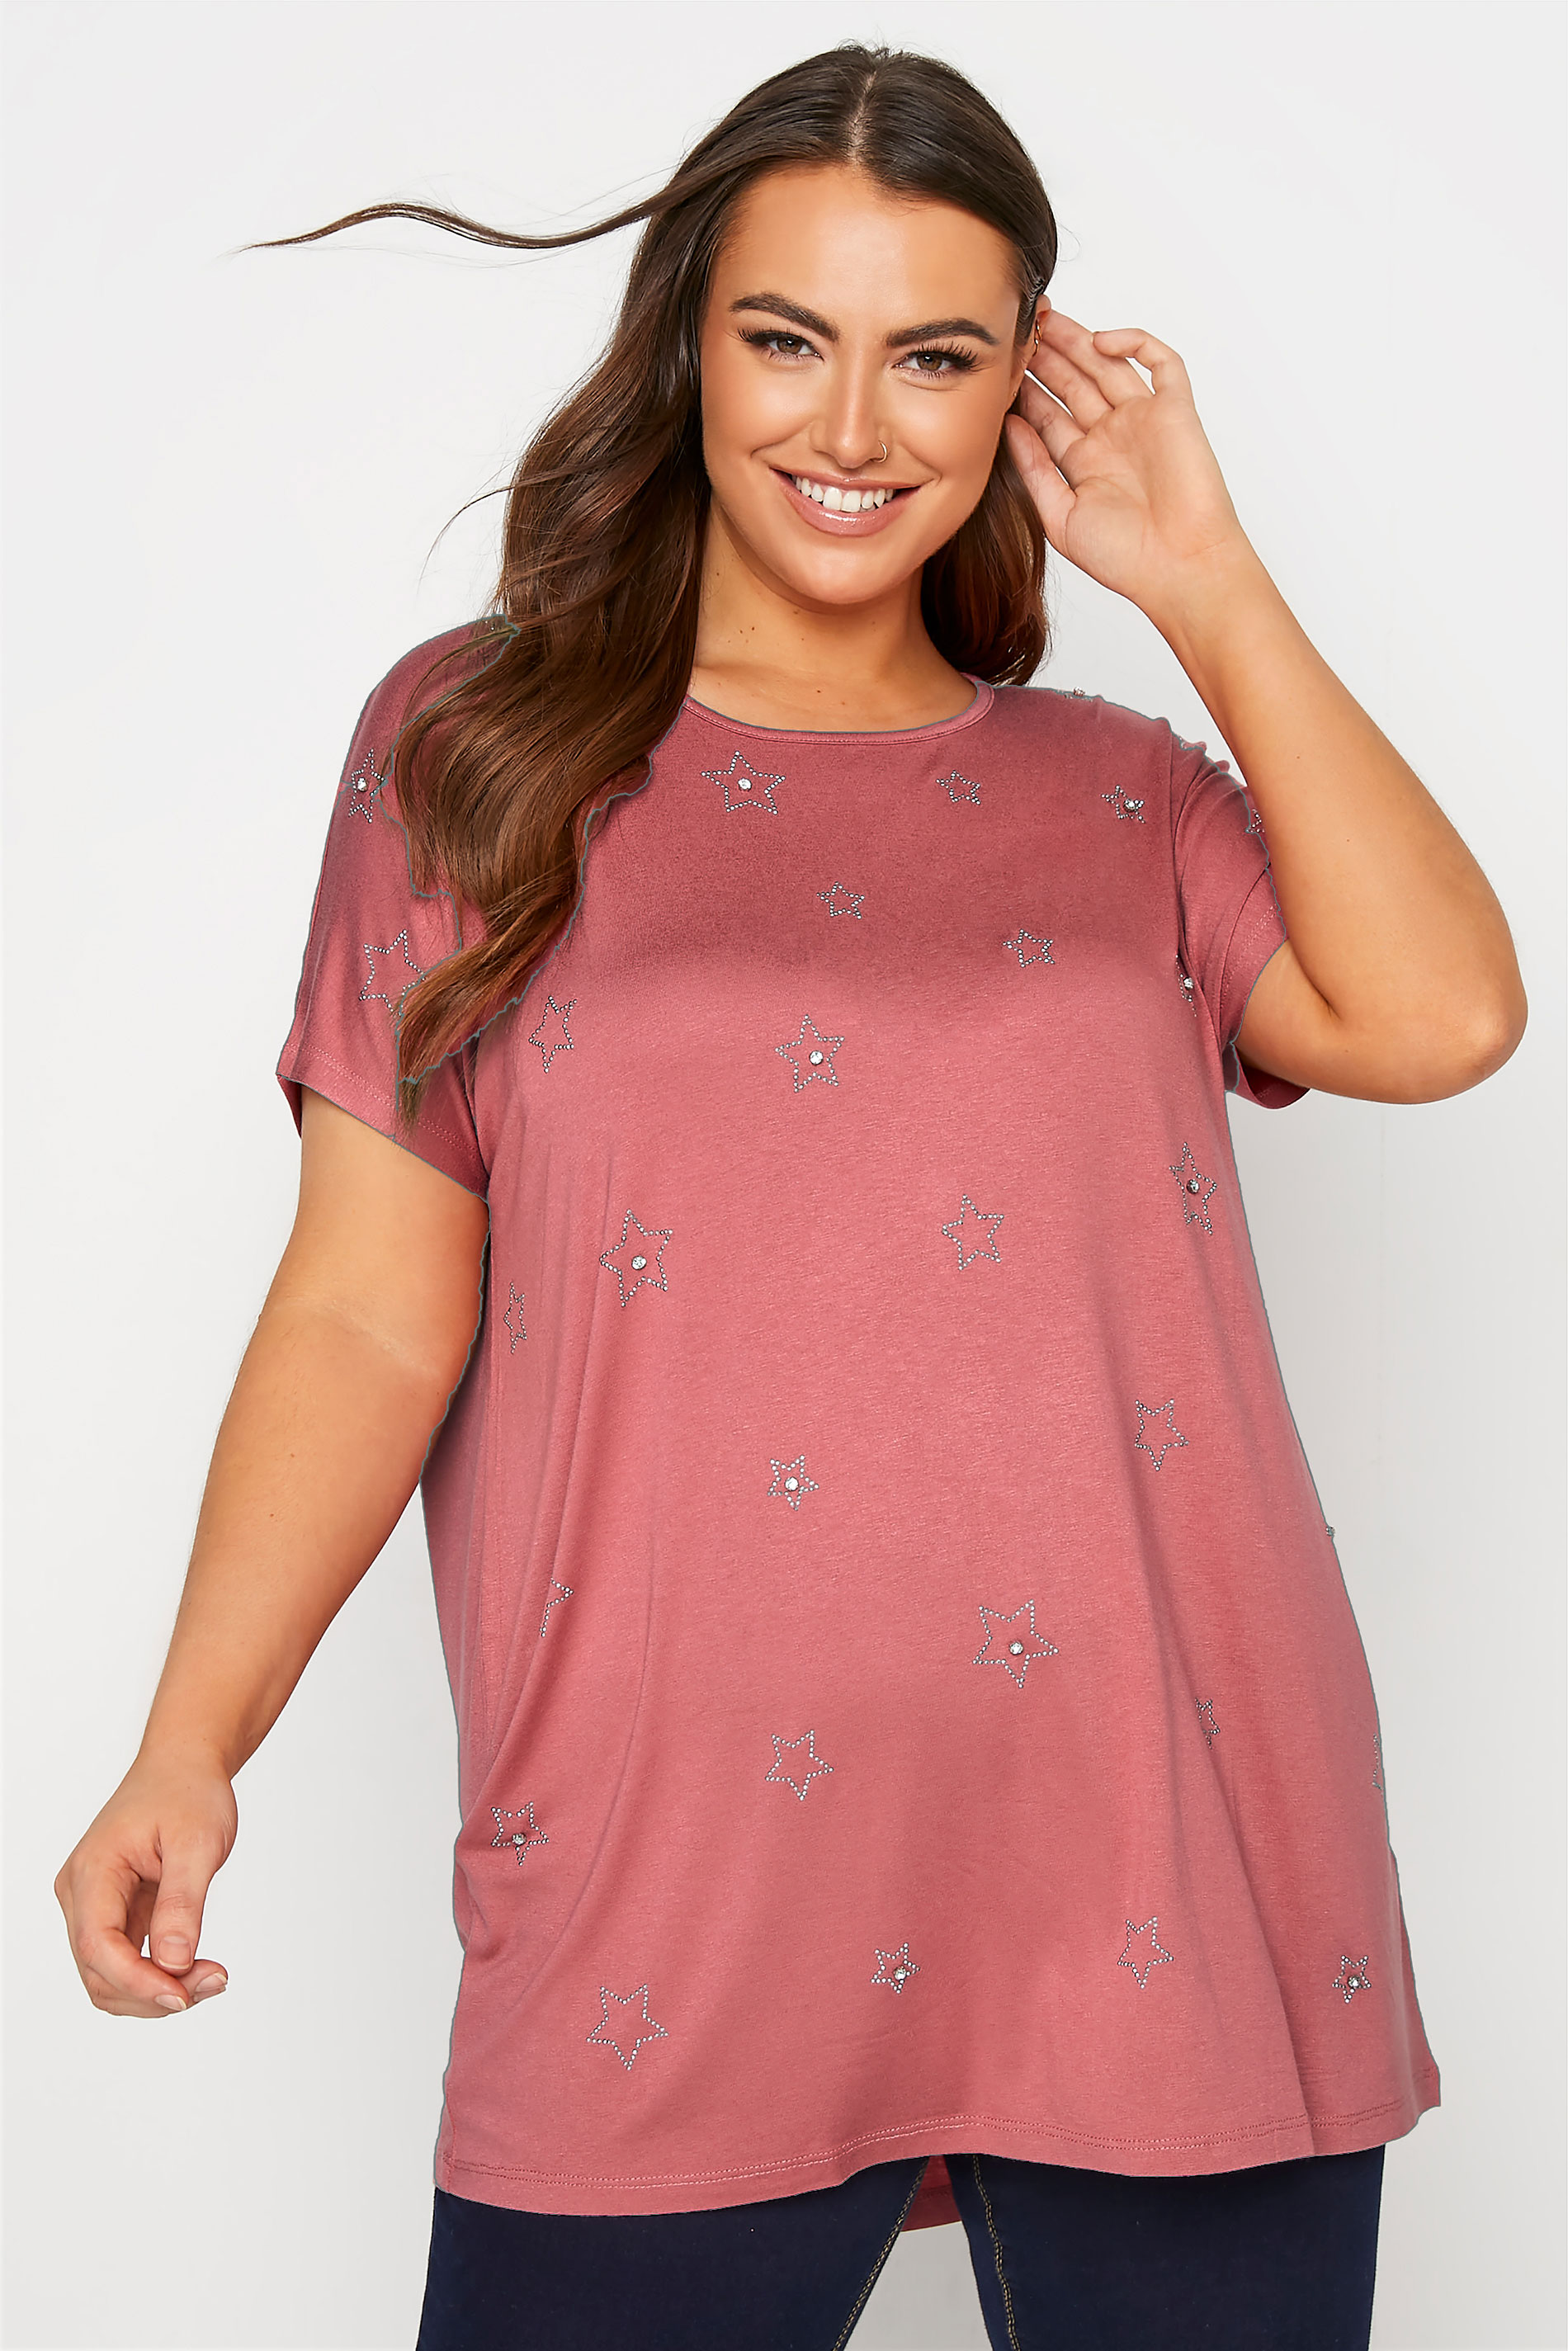 Grande taille  Tops Grande taille  Tops Casual | T-Shirt Rose Étoiles en Strass - AP50160